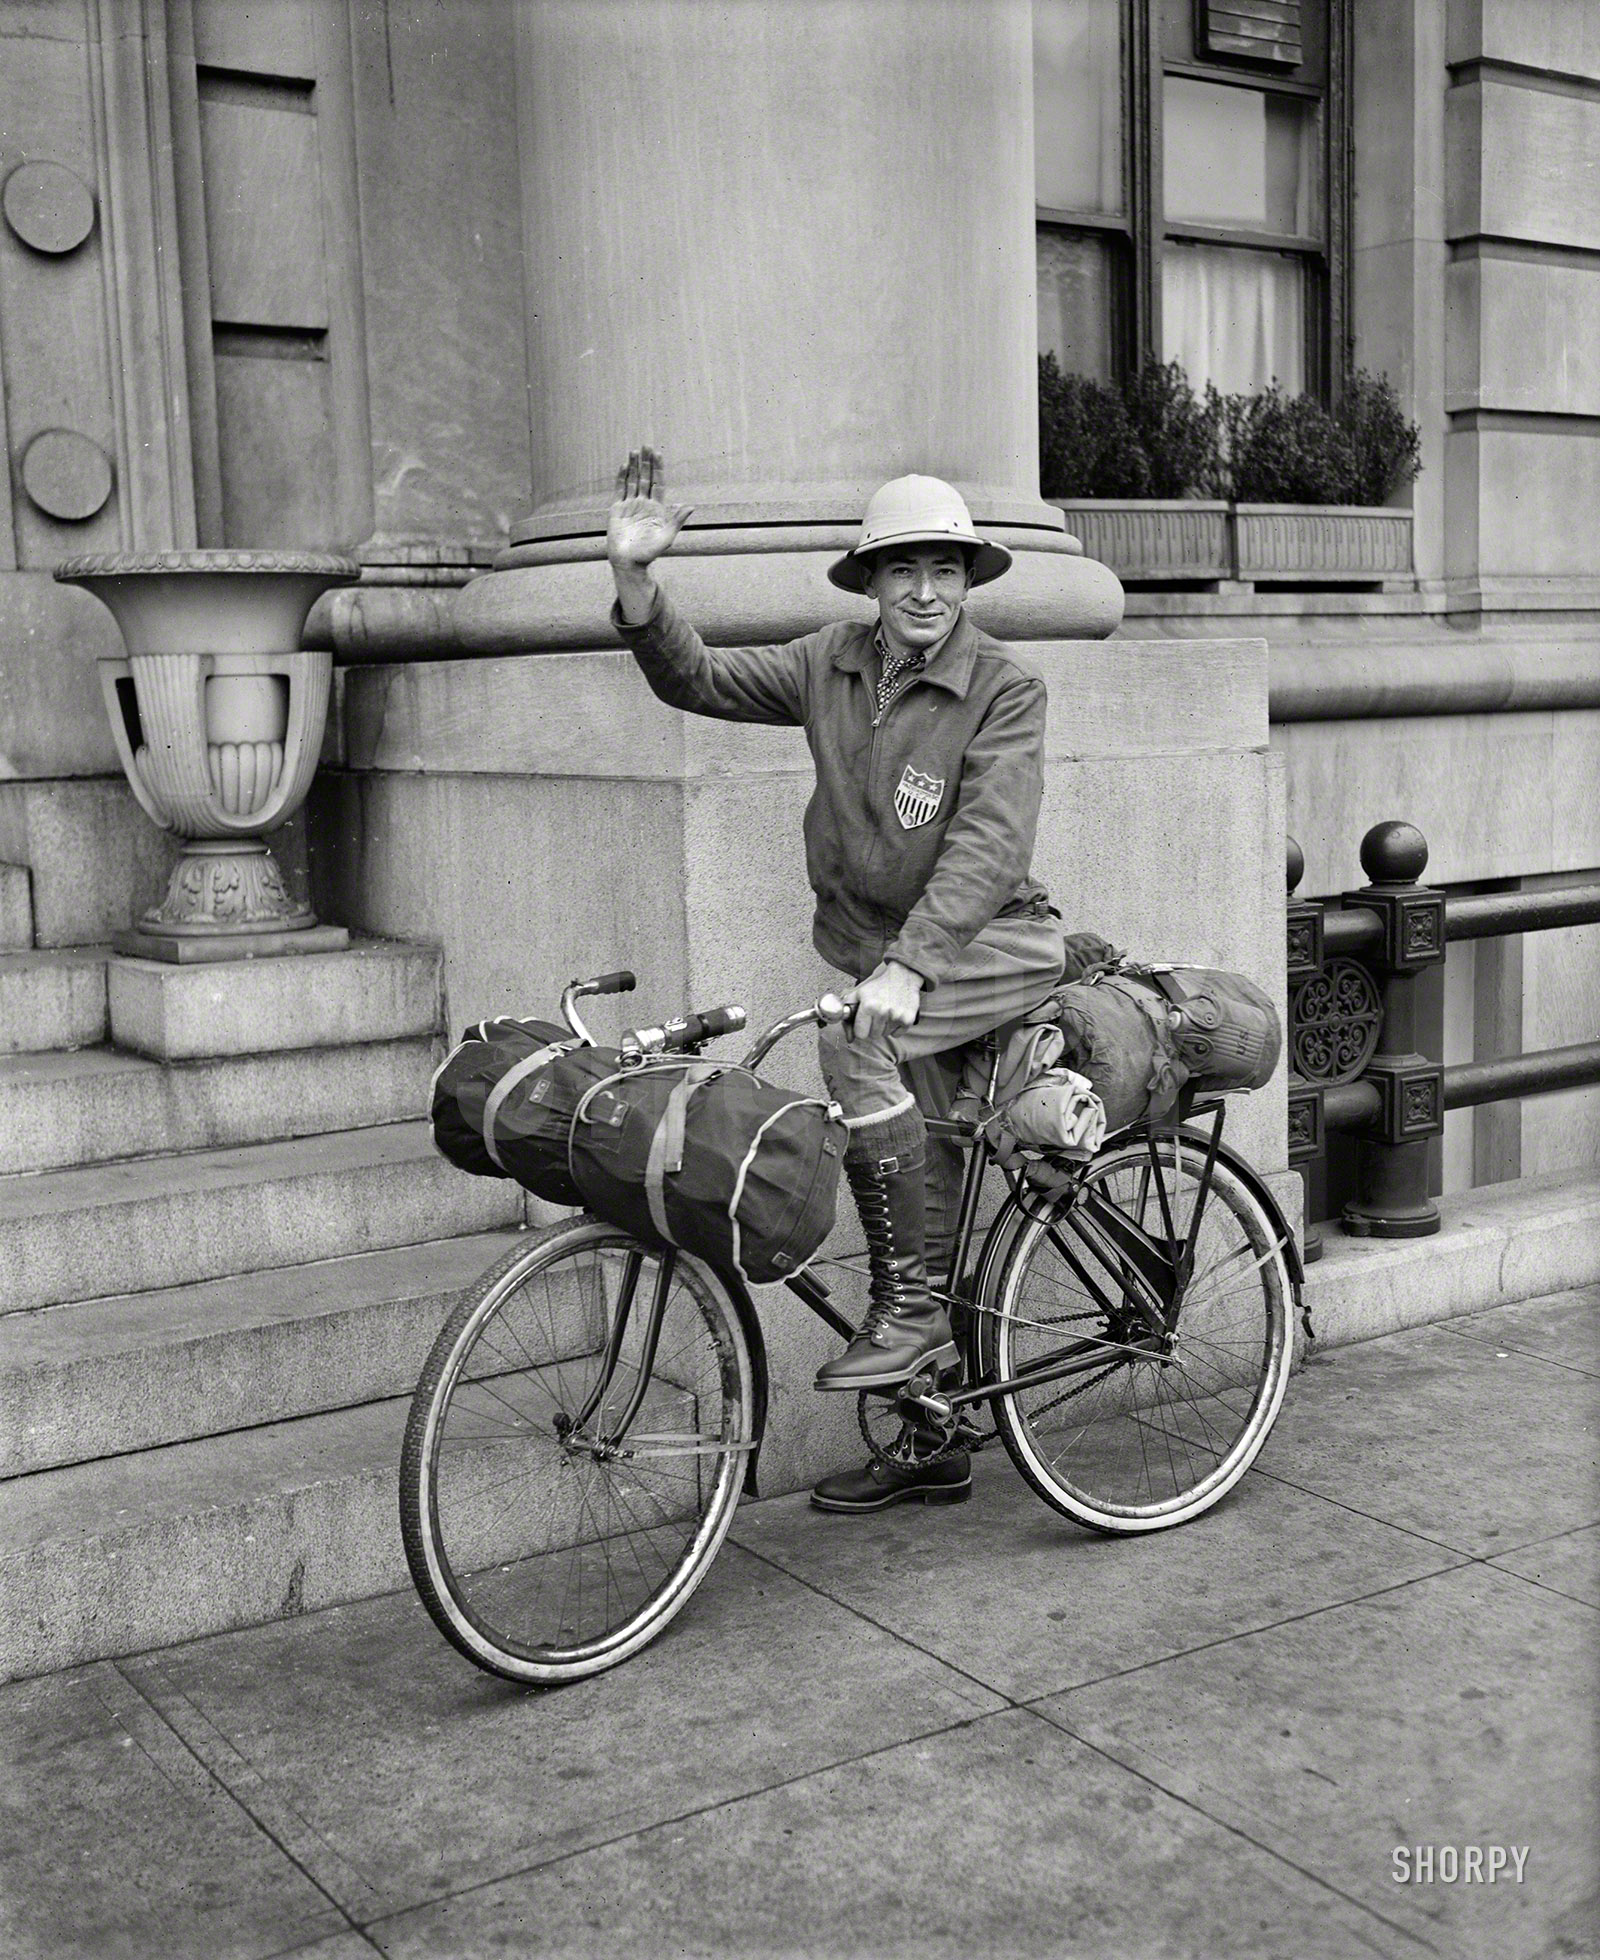 &nbsp; &nbsp; &nbsp; &nbsp; Ready for international bicycle ride. Henry G. Slaughter of Washington, supported by those interested in publicizing the Inter-American Highway, prepares to leave for a trip which will carry him, if he is successful, down into the tropics through Central America to the Argentine.
November 23, 1935. Washington, D.C. "Henry G. Slaughter." Harris & Ewing Collection glass negative. View full size.